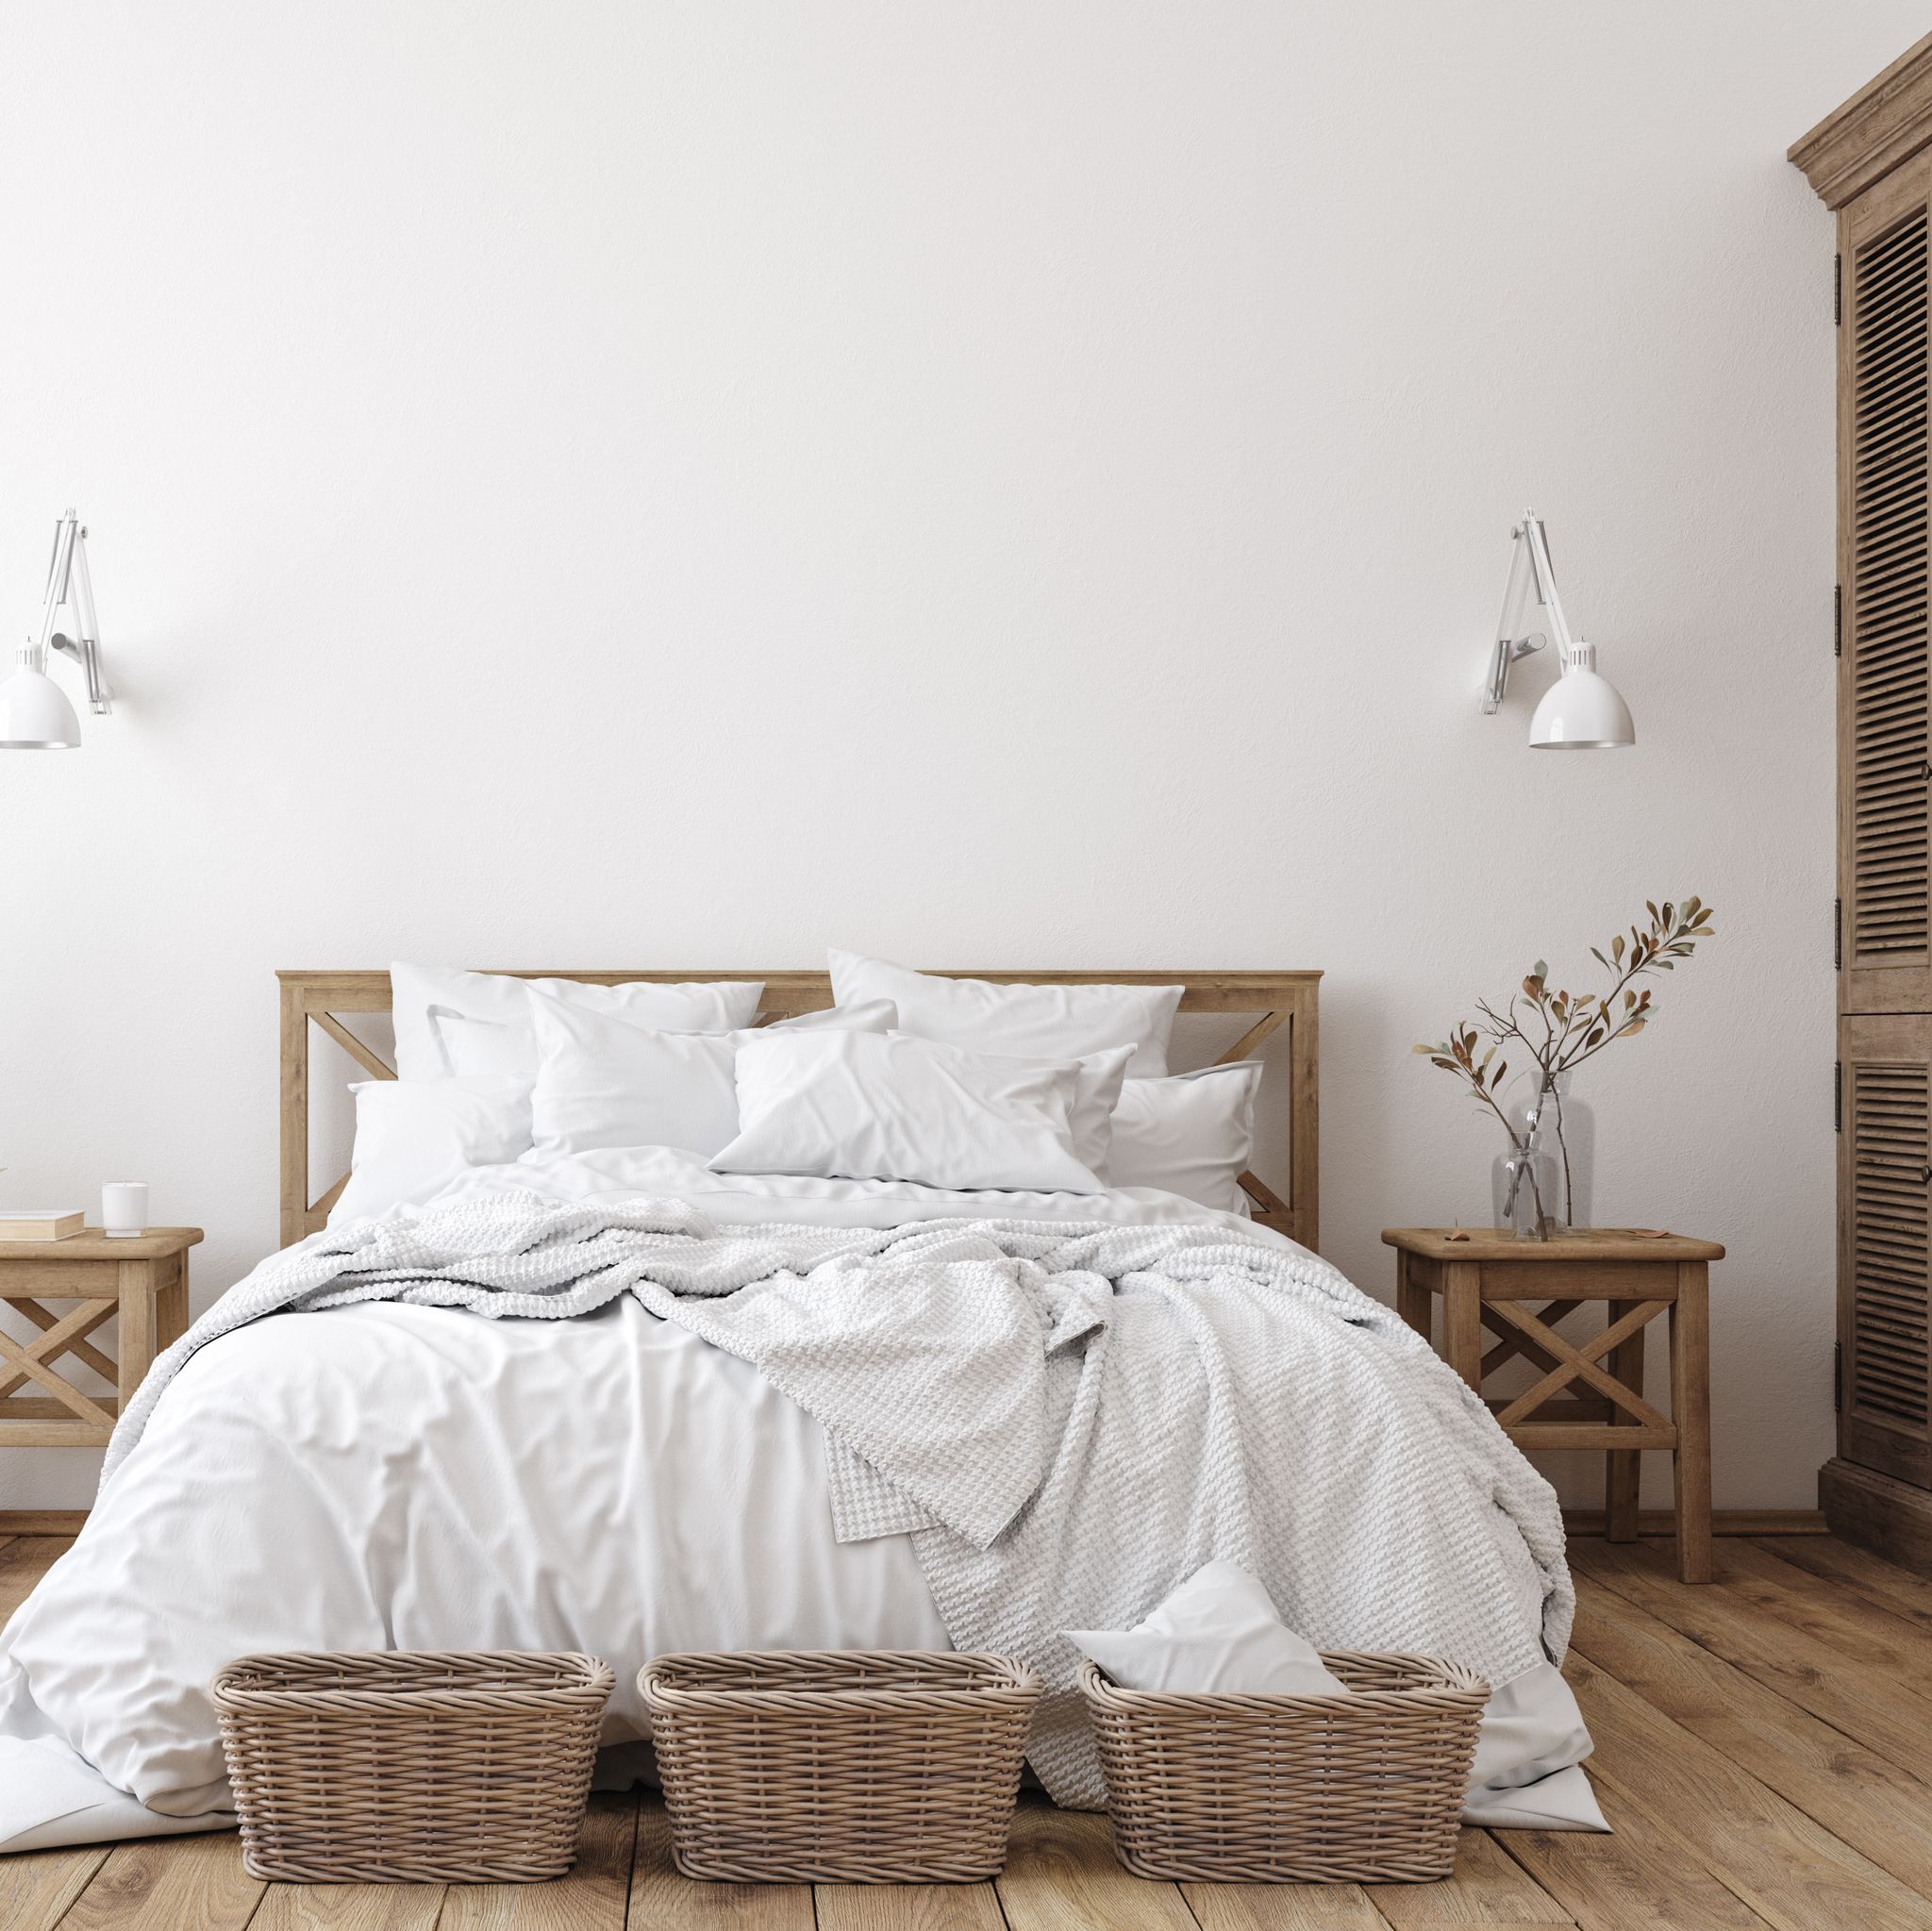 How to choose new bedding - what thread count means